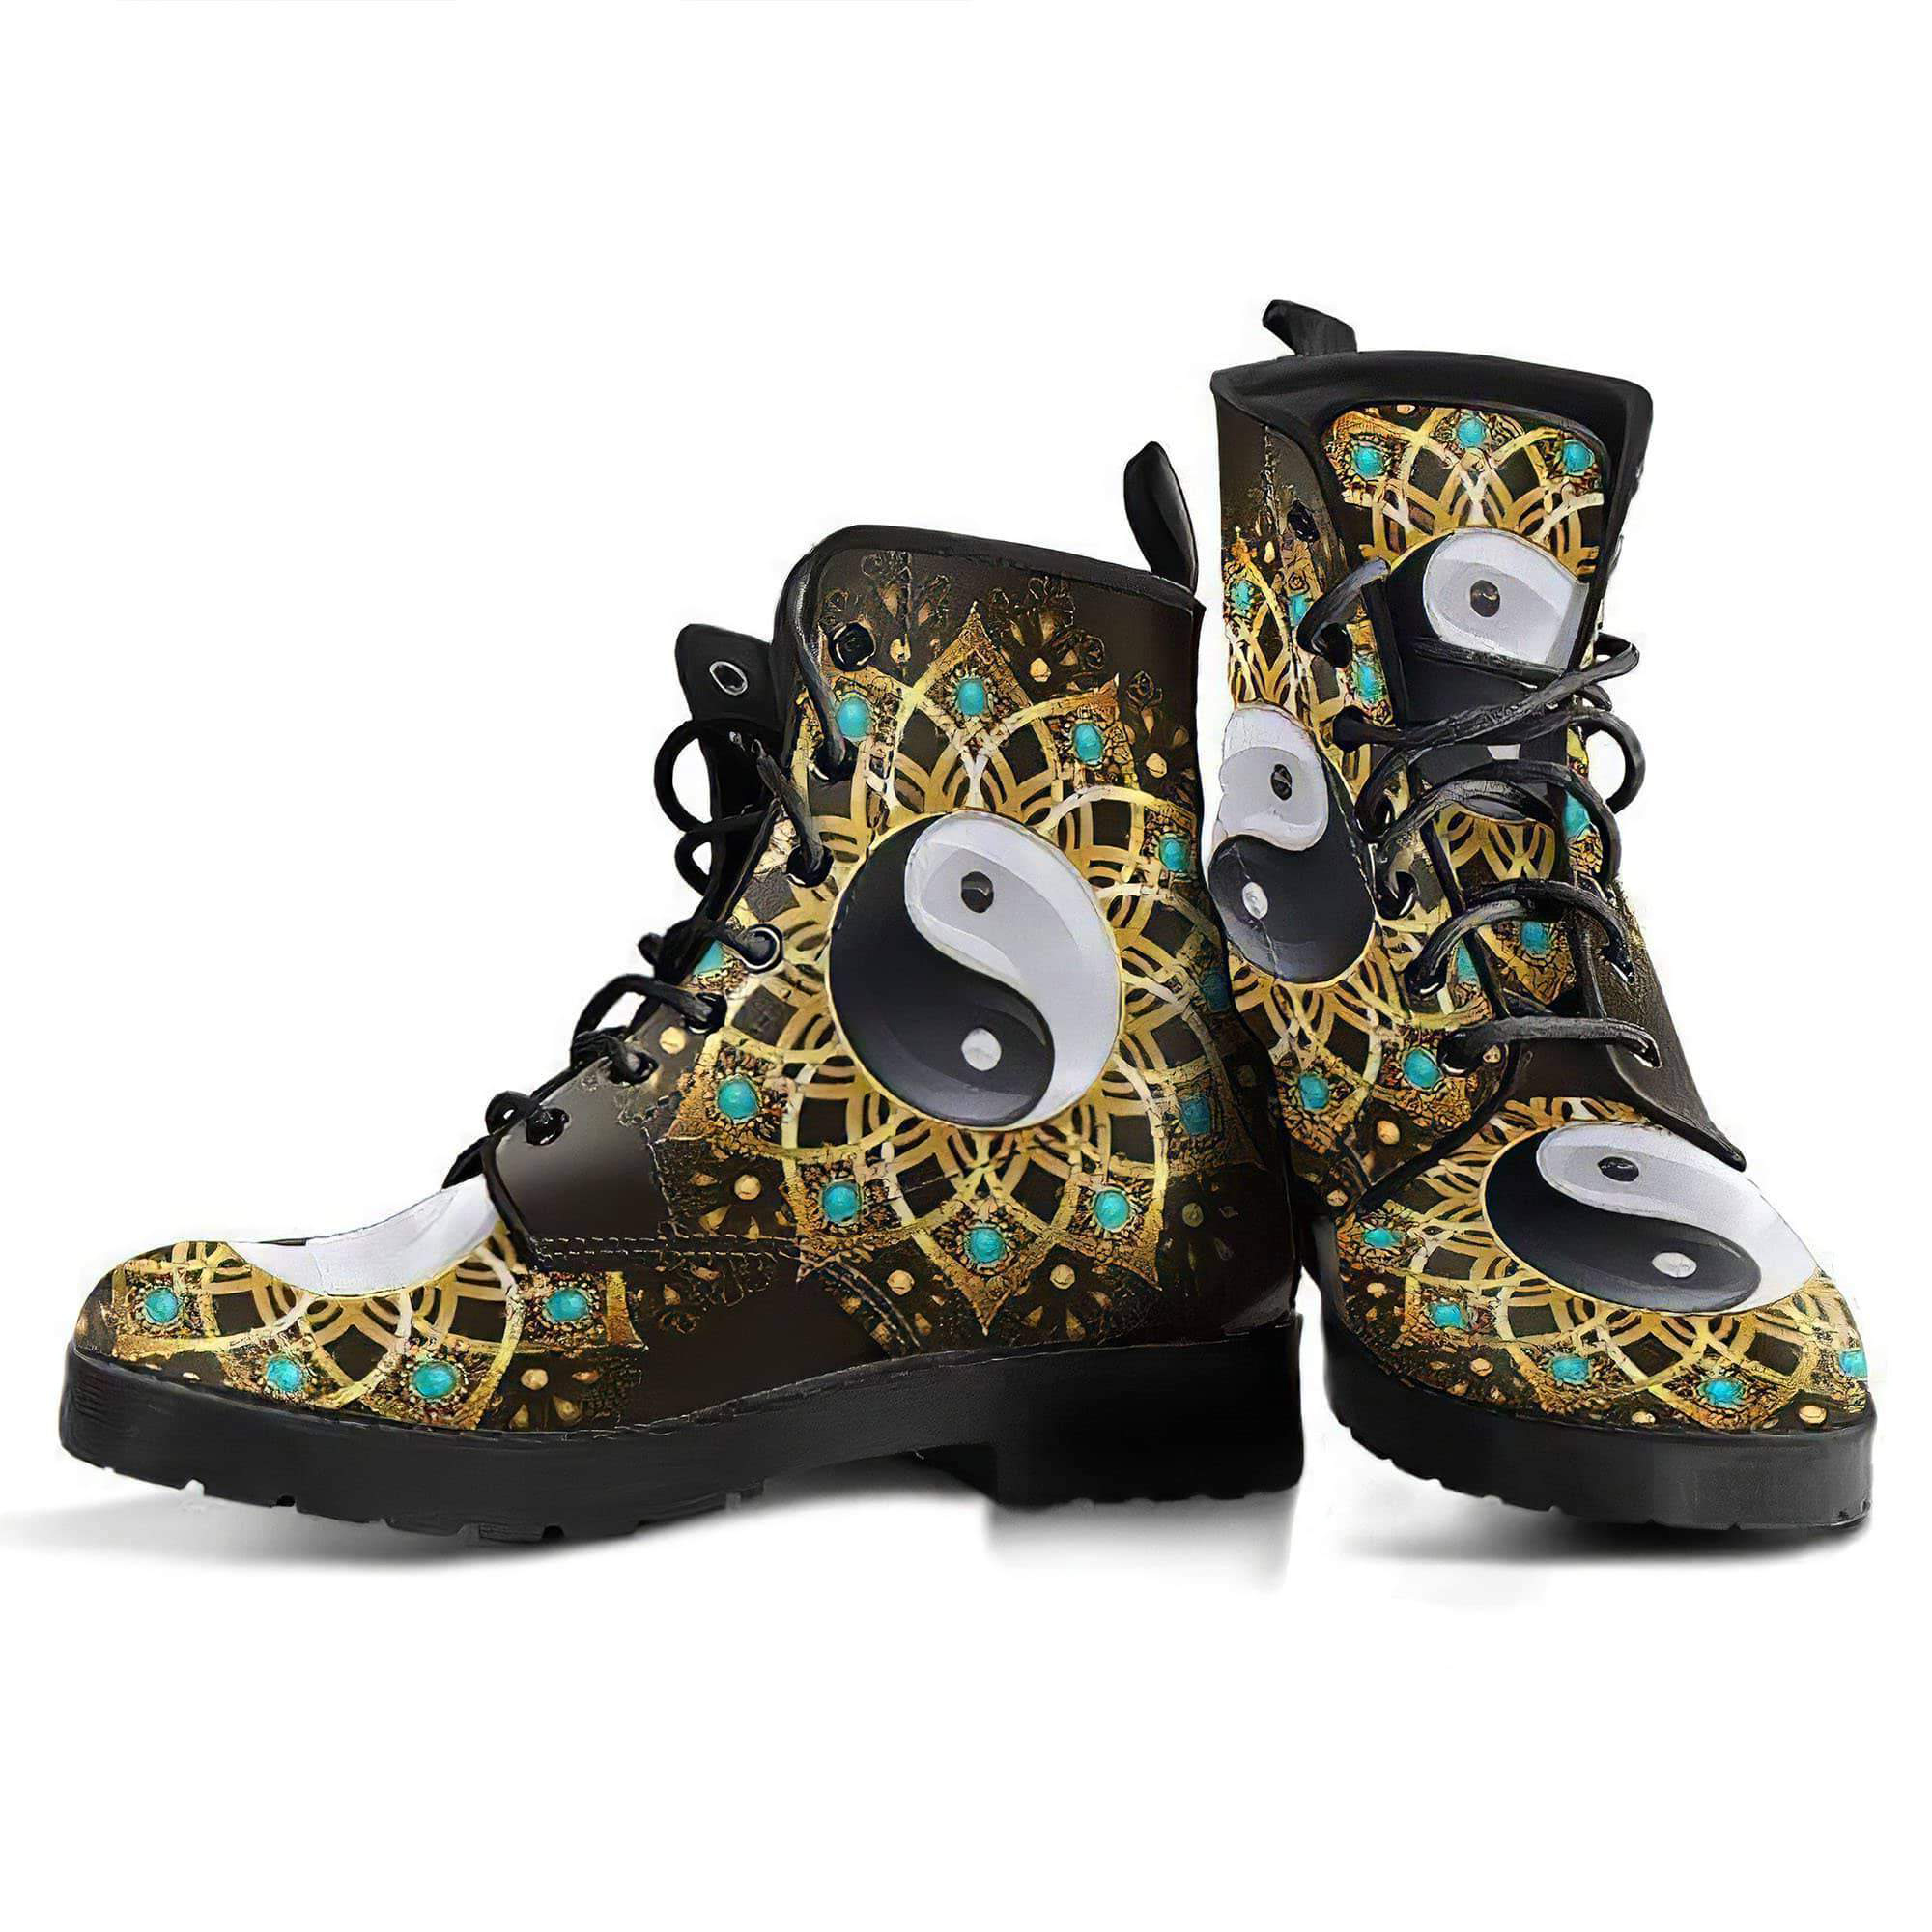 yinyang-mandala-5-handcrafted-boots-women-s-leather-boots-12051984941117.jpg